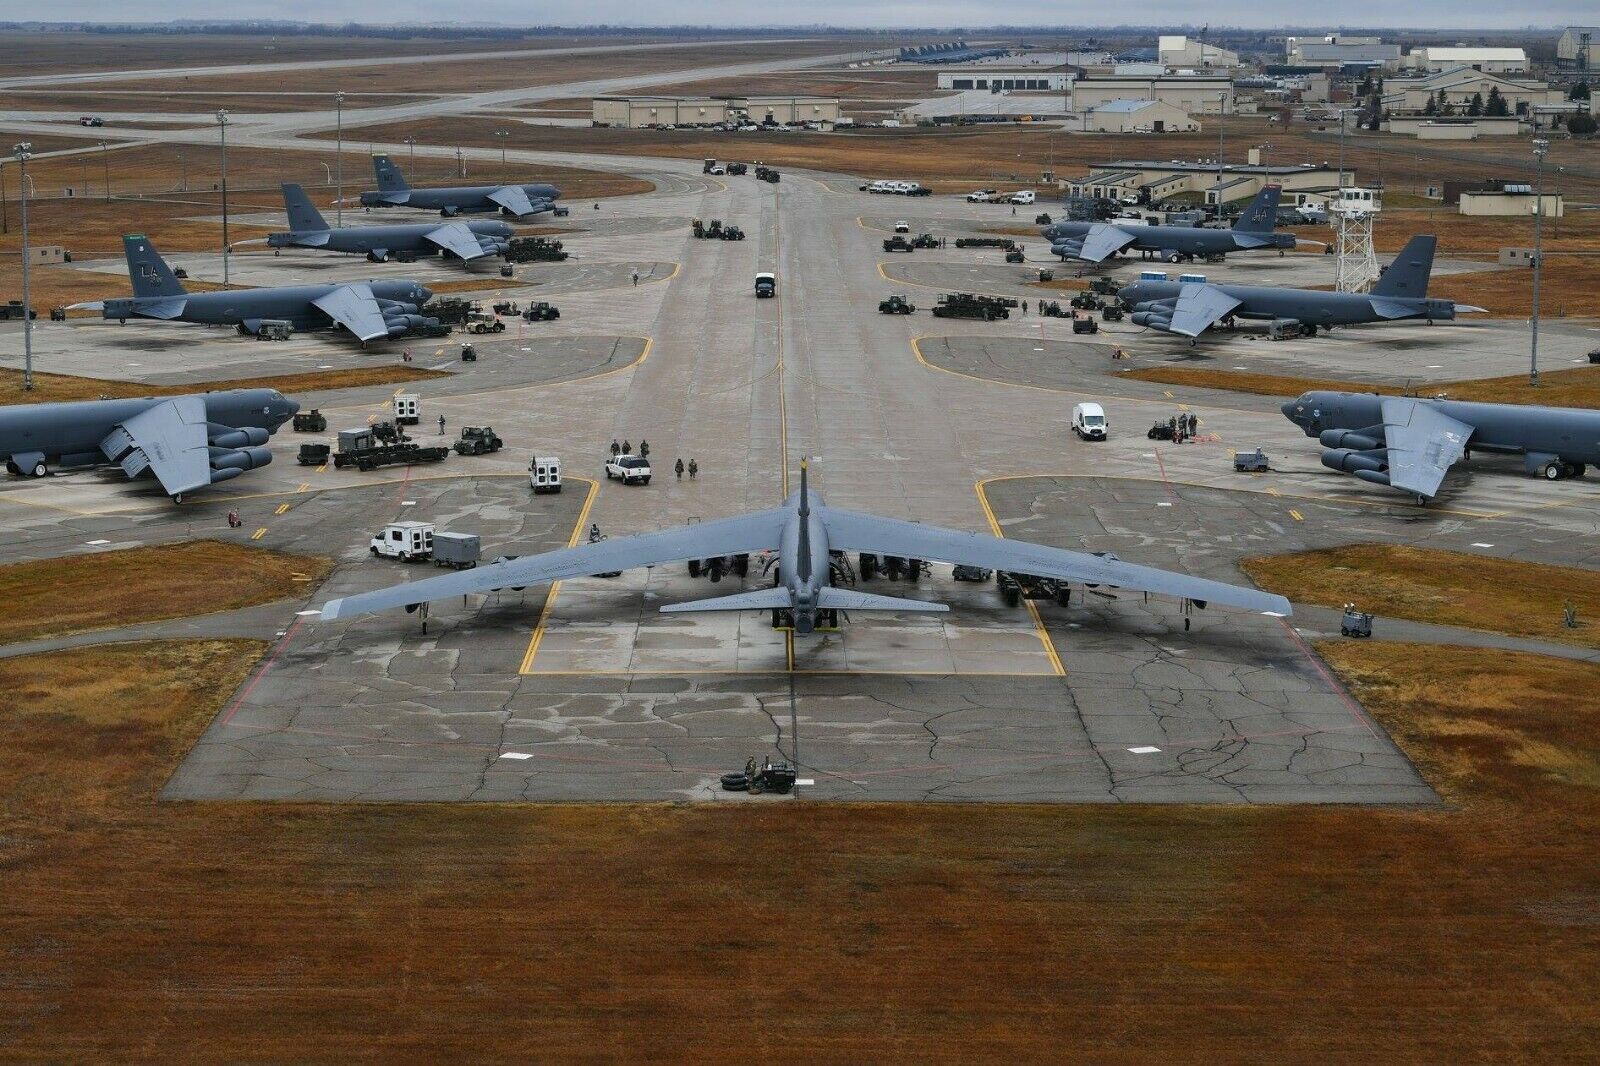 B52H Stratofortresses Minot Air Force Base ND 4x6 Re-Print 1059*